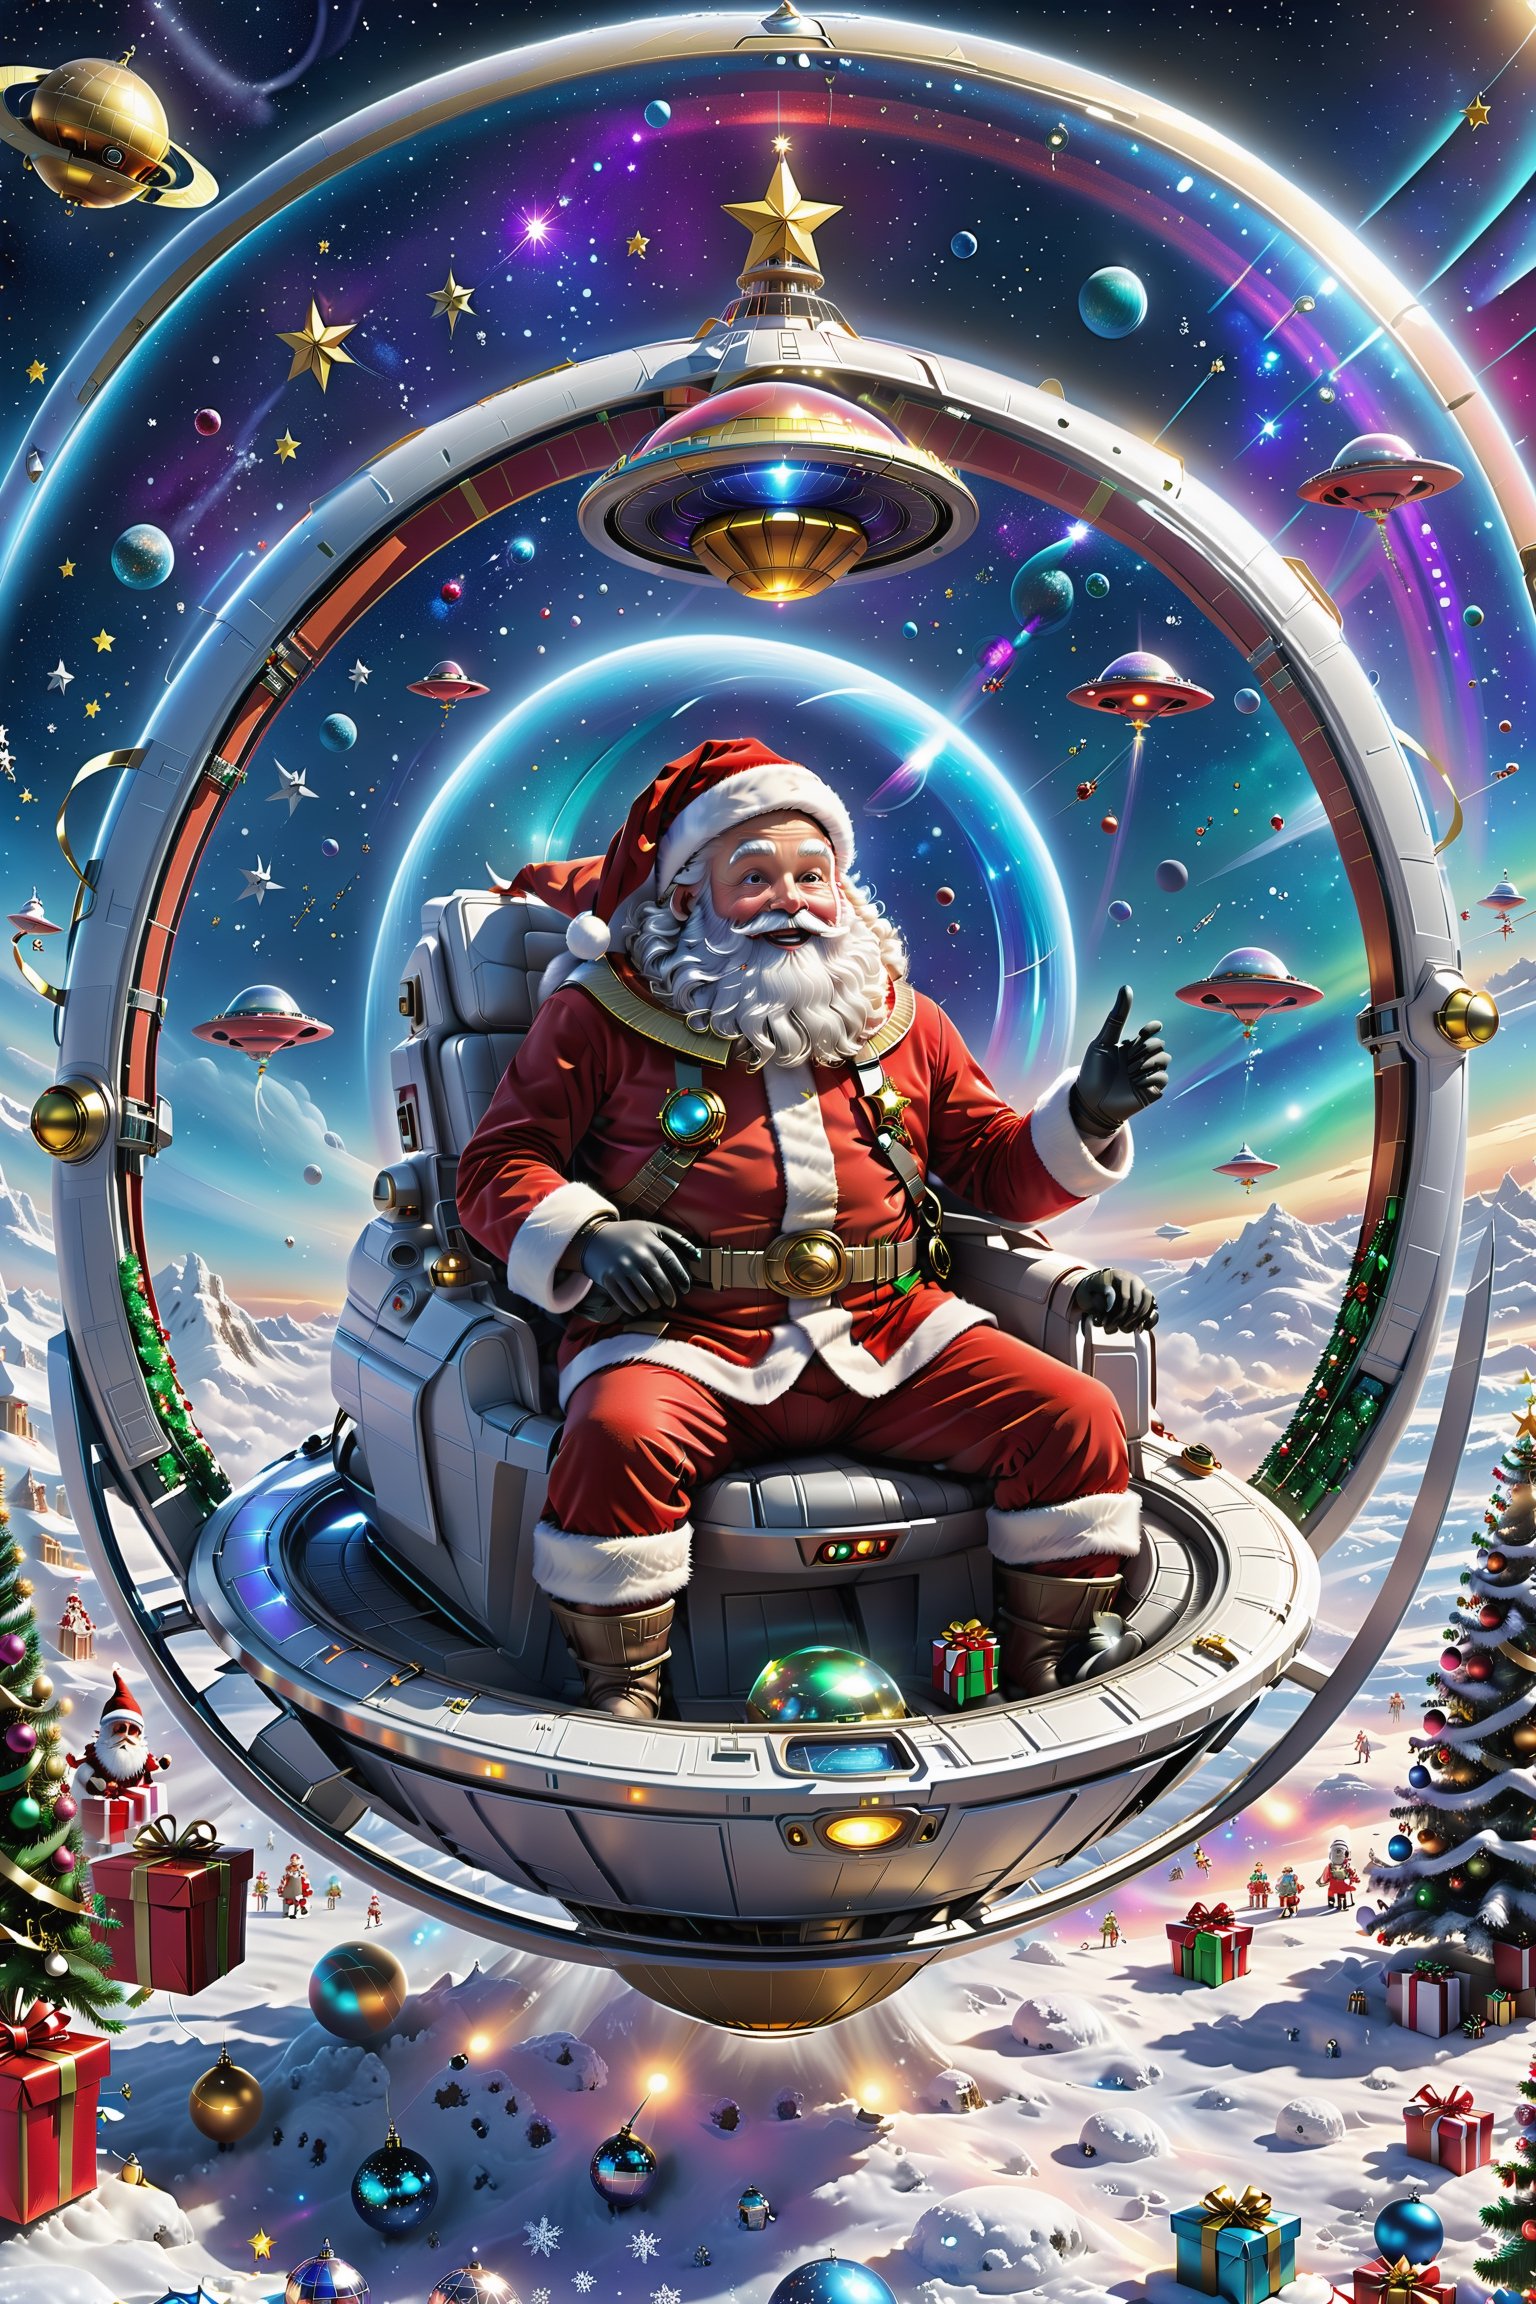 In this sci-fi and whimsical scene, Santa Claus rides a cool UFO, blending traditional Christmas imagery with futuristic technology to present a never-before-seen fantasy.

The bottom of the UFO may be adorned with colored lights that glow brightly, and the exterior of the UFO may be adorned with Christmas motifs, such as snowflakes and gift boxes, adding a festive touch to the spacecraft. Alternatively, the UFO is surrounded by a ring of sparkling Christmas ribbons, like a floating halo.

Santa Claus is dressed in a stylish spacesuit and wears a Christmas hat with a star design. He is sitting in the cockpit of the UFO, holding a gift bag that resembles a spaceship joystick in his hand, with a happy and excited expression, as if he is preparing to depart to deliver Christmas gifts to children all over the world.

All around may be a starry sky and nebulae in space, displaying a cosmic splendor. Or in the distance, there may be other vehicles, such as colorful gift ships or Christmas rockets, decorating the space stage.

The whole picture is full of technology and creativity, showing a humorous and wonderful imagination of Christmas in the future.